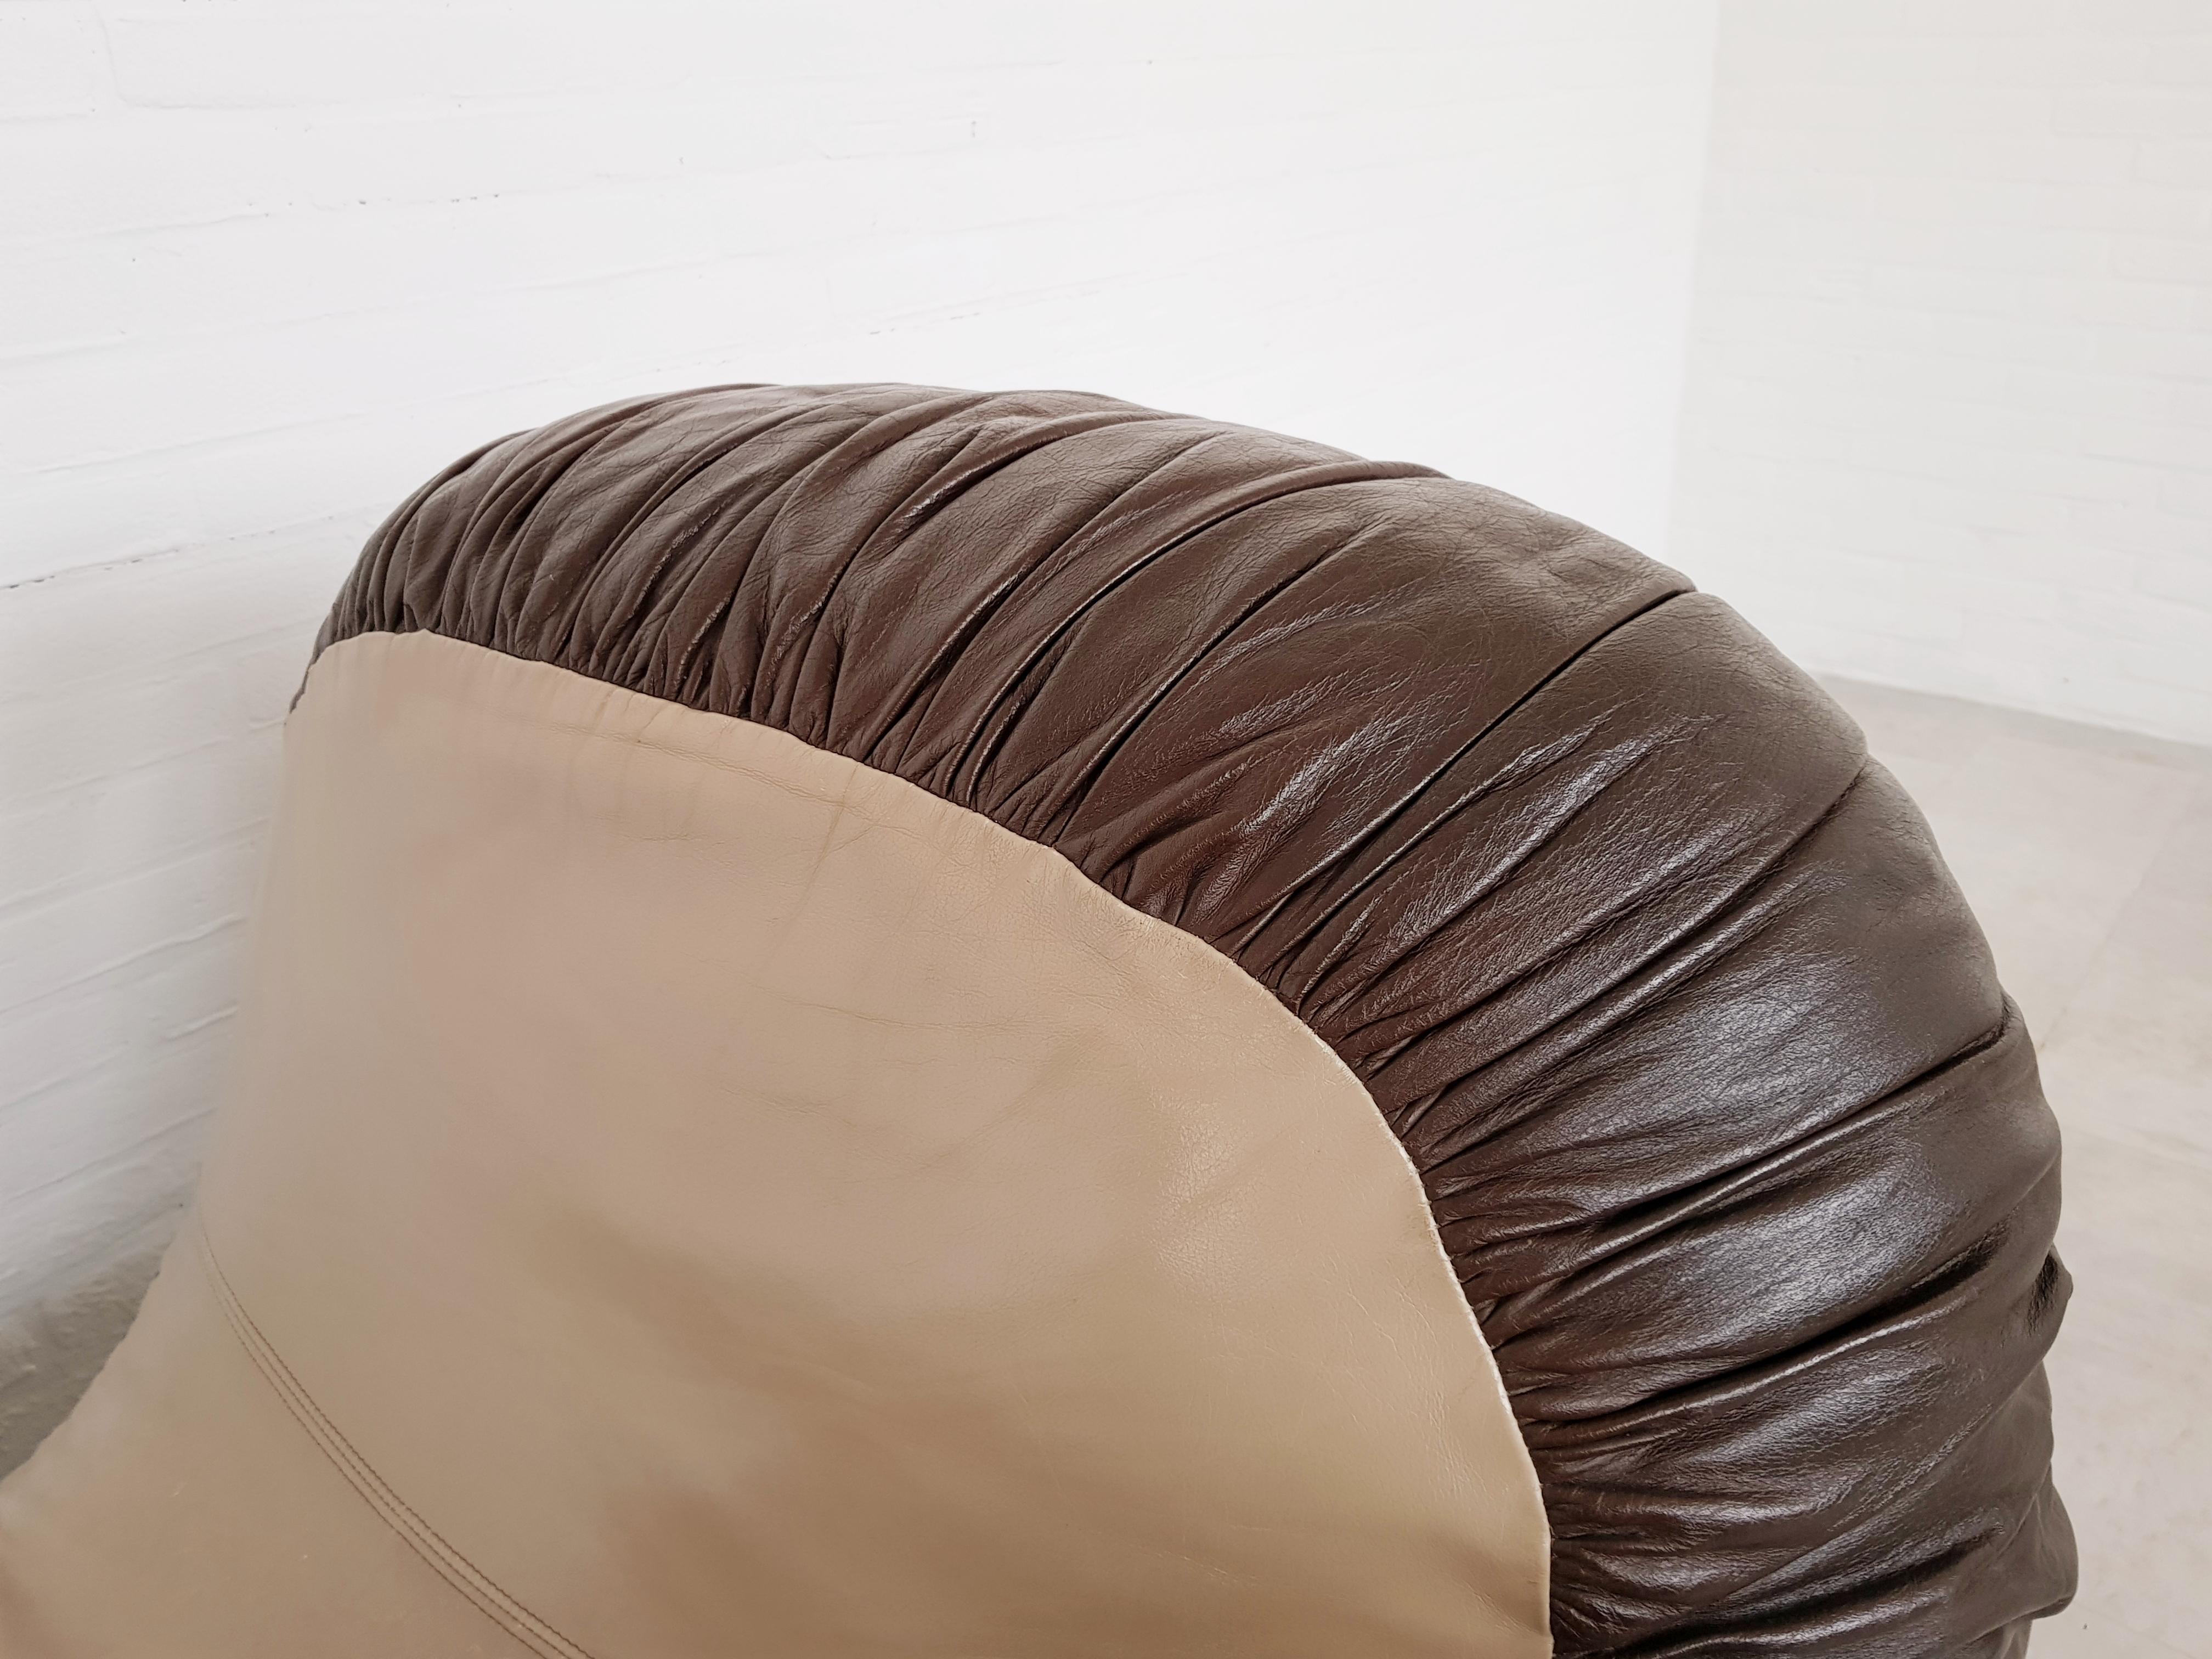 De Sede, DS 2878 chaise longue boxing glove, circa 1970-1975. This large chaise lounge boxing glove is designed by the Desede design team. Upholstered in a two toned leather upholstery, beige and brown. This chair is part of the older